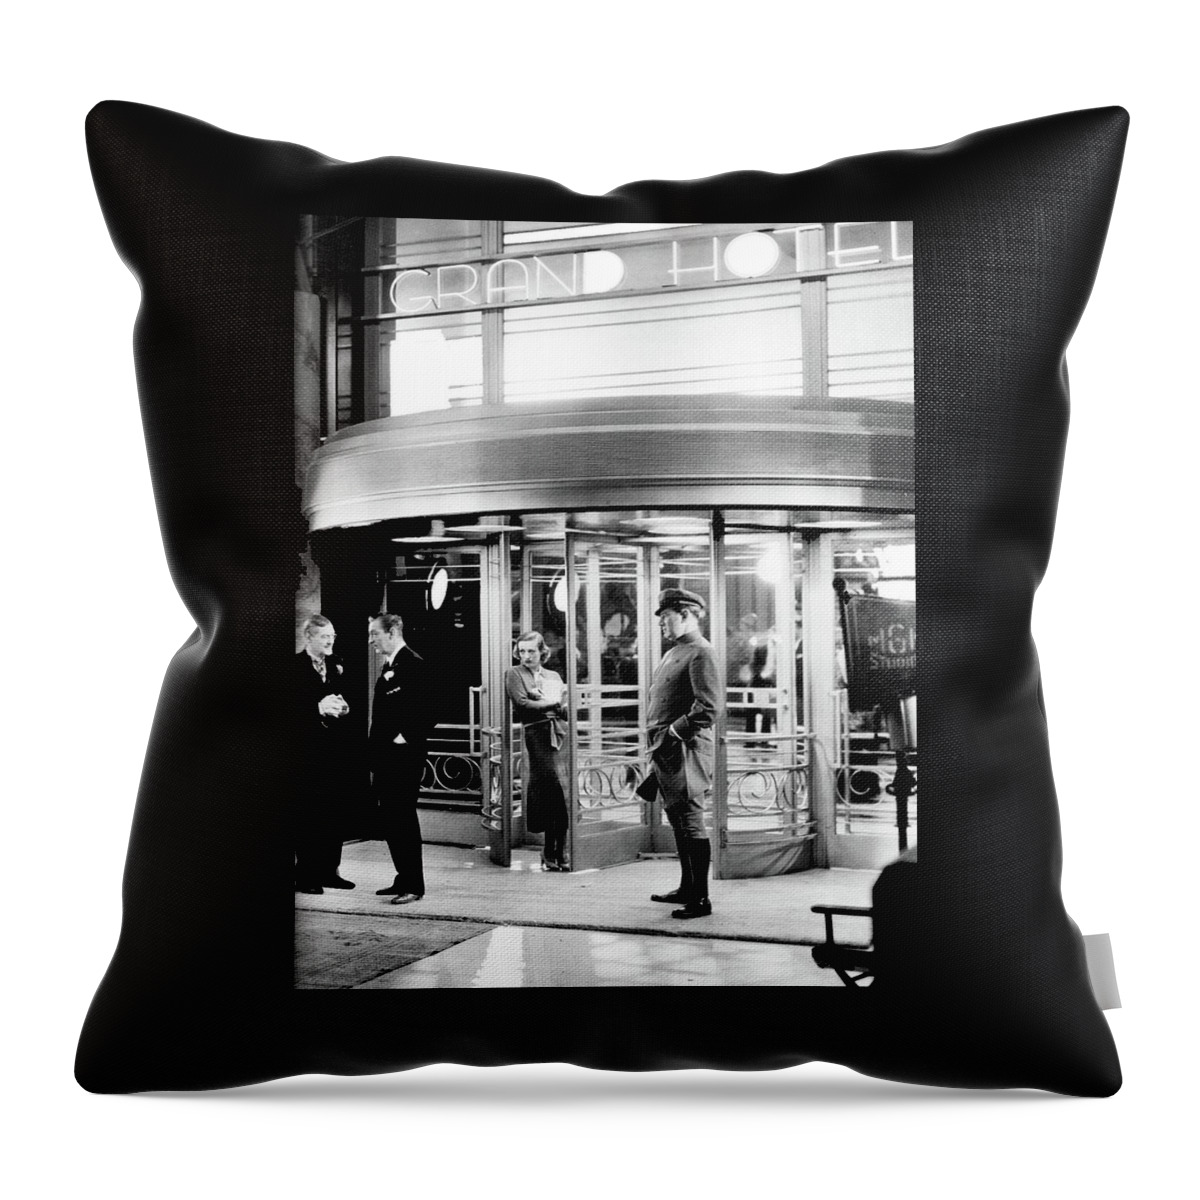 Art Deco Set Designed By Cedric Gibbons Grand Hotel 1932 Throw Pillow featuring the photograph Art Deco set designed by Cedric Gibbons Grand Hotel 1932 by David Lee Guss